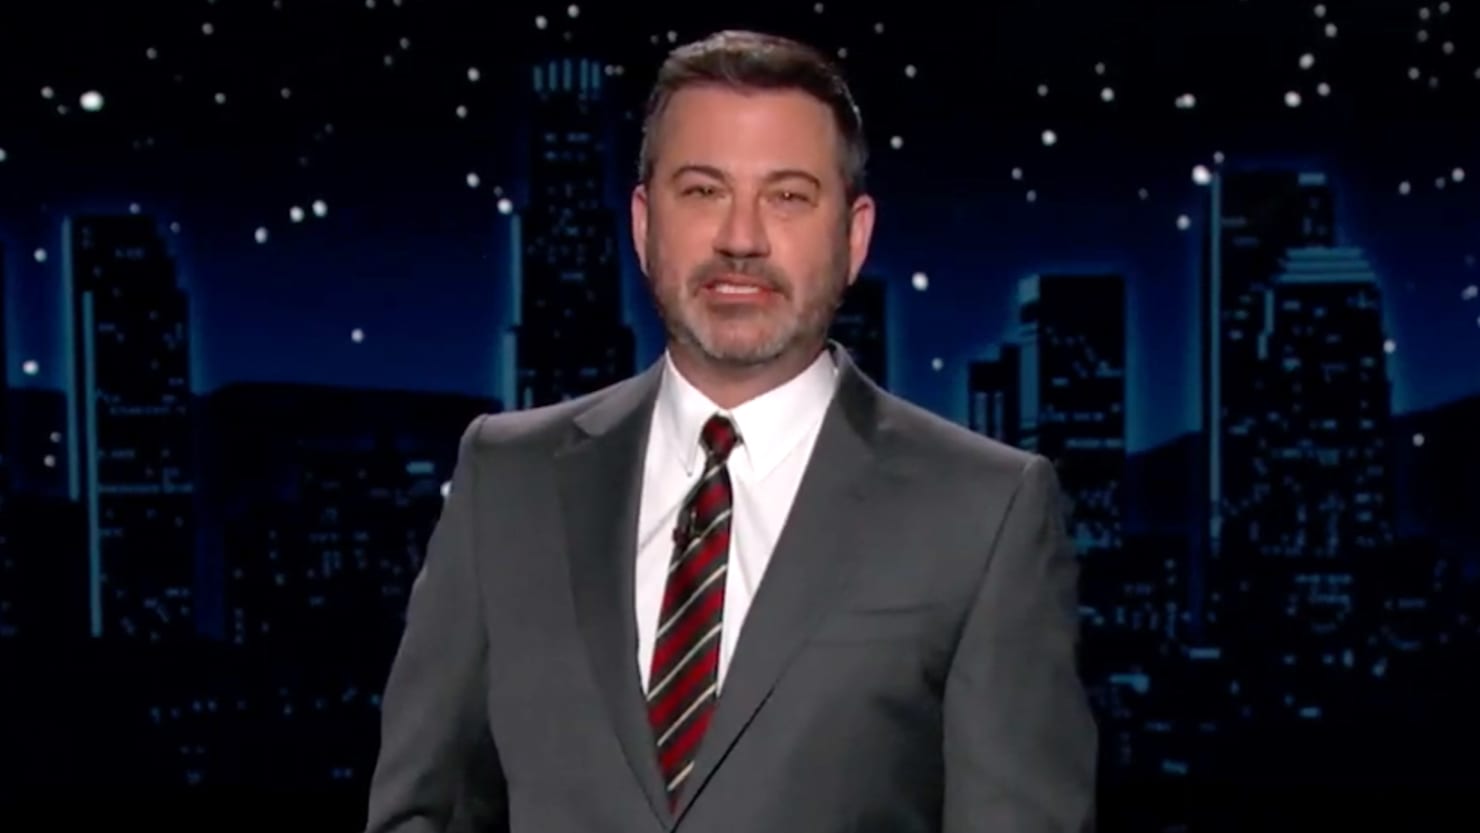 Jimmy Kimmel talks about Mitch McConnell, says you ‘popped’ with Trump